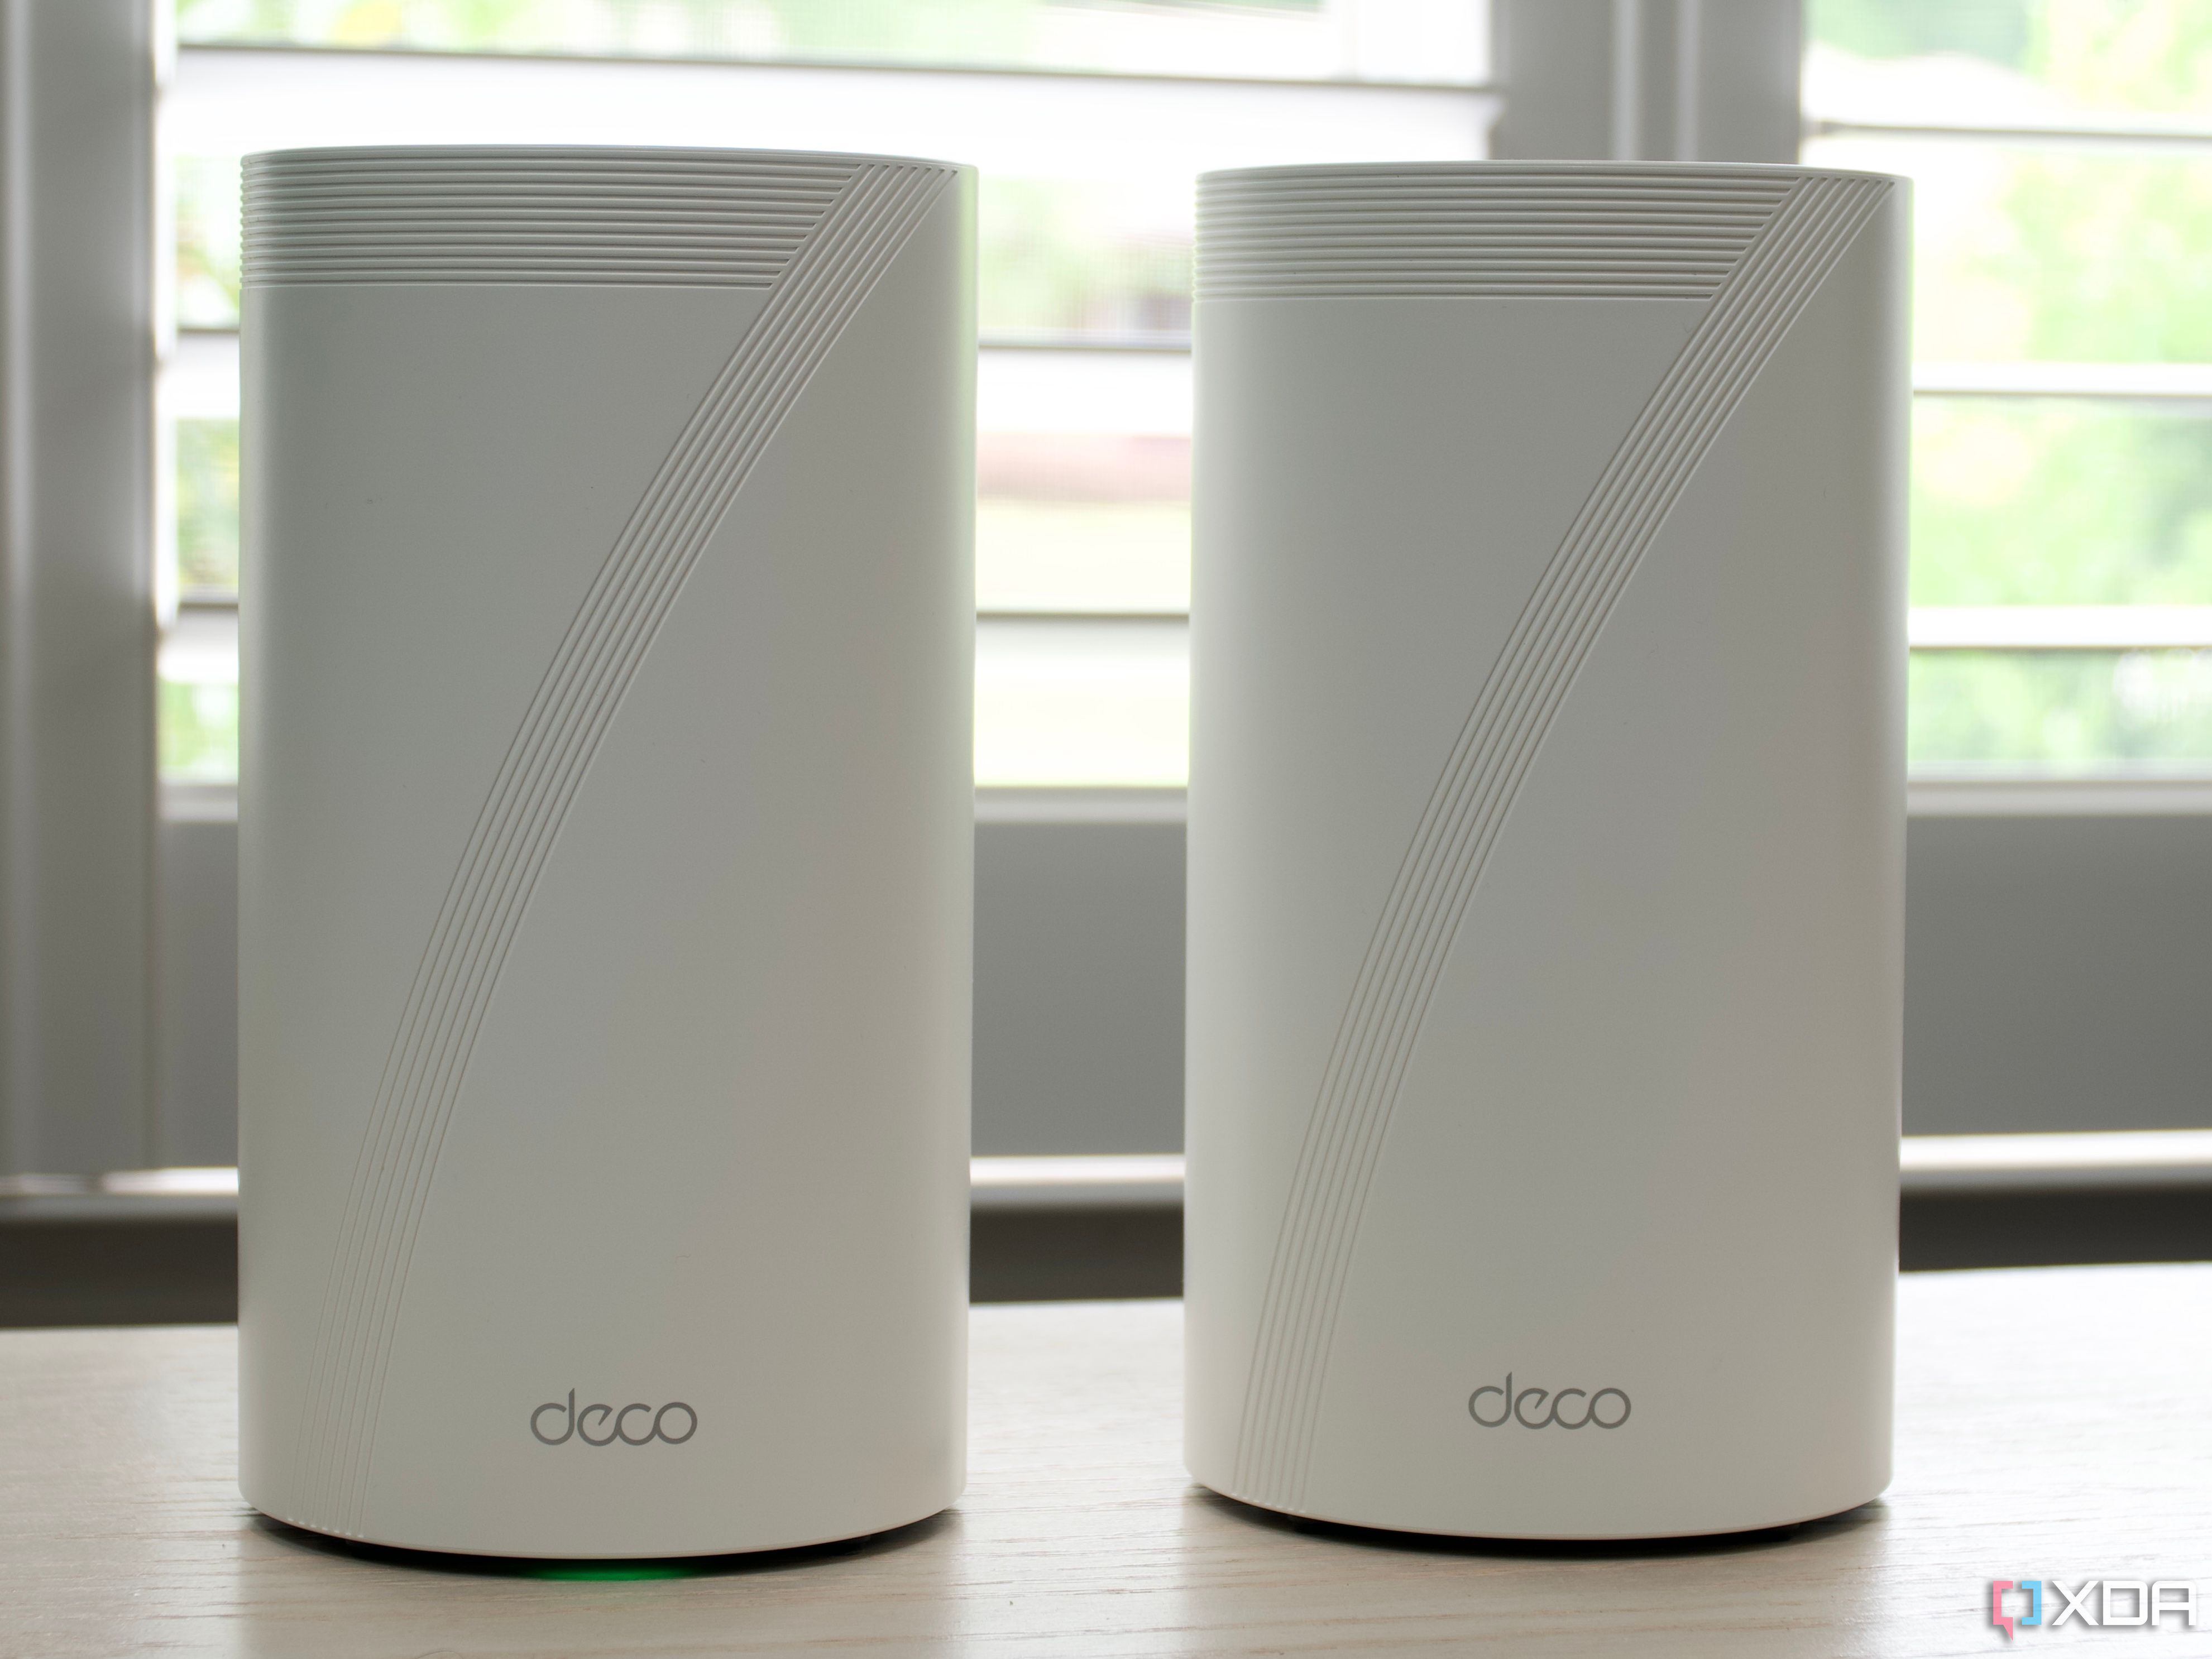 TP-Link Deco BE85 mesh system two nodes from the front